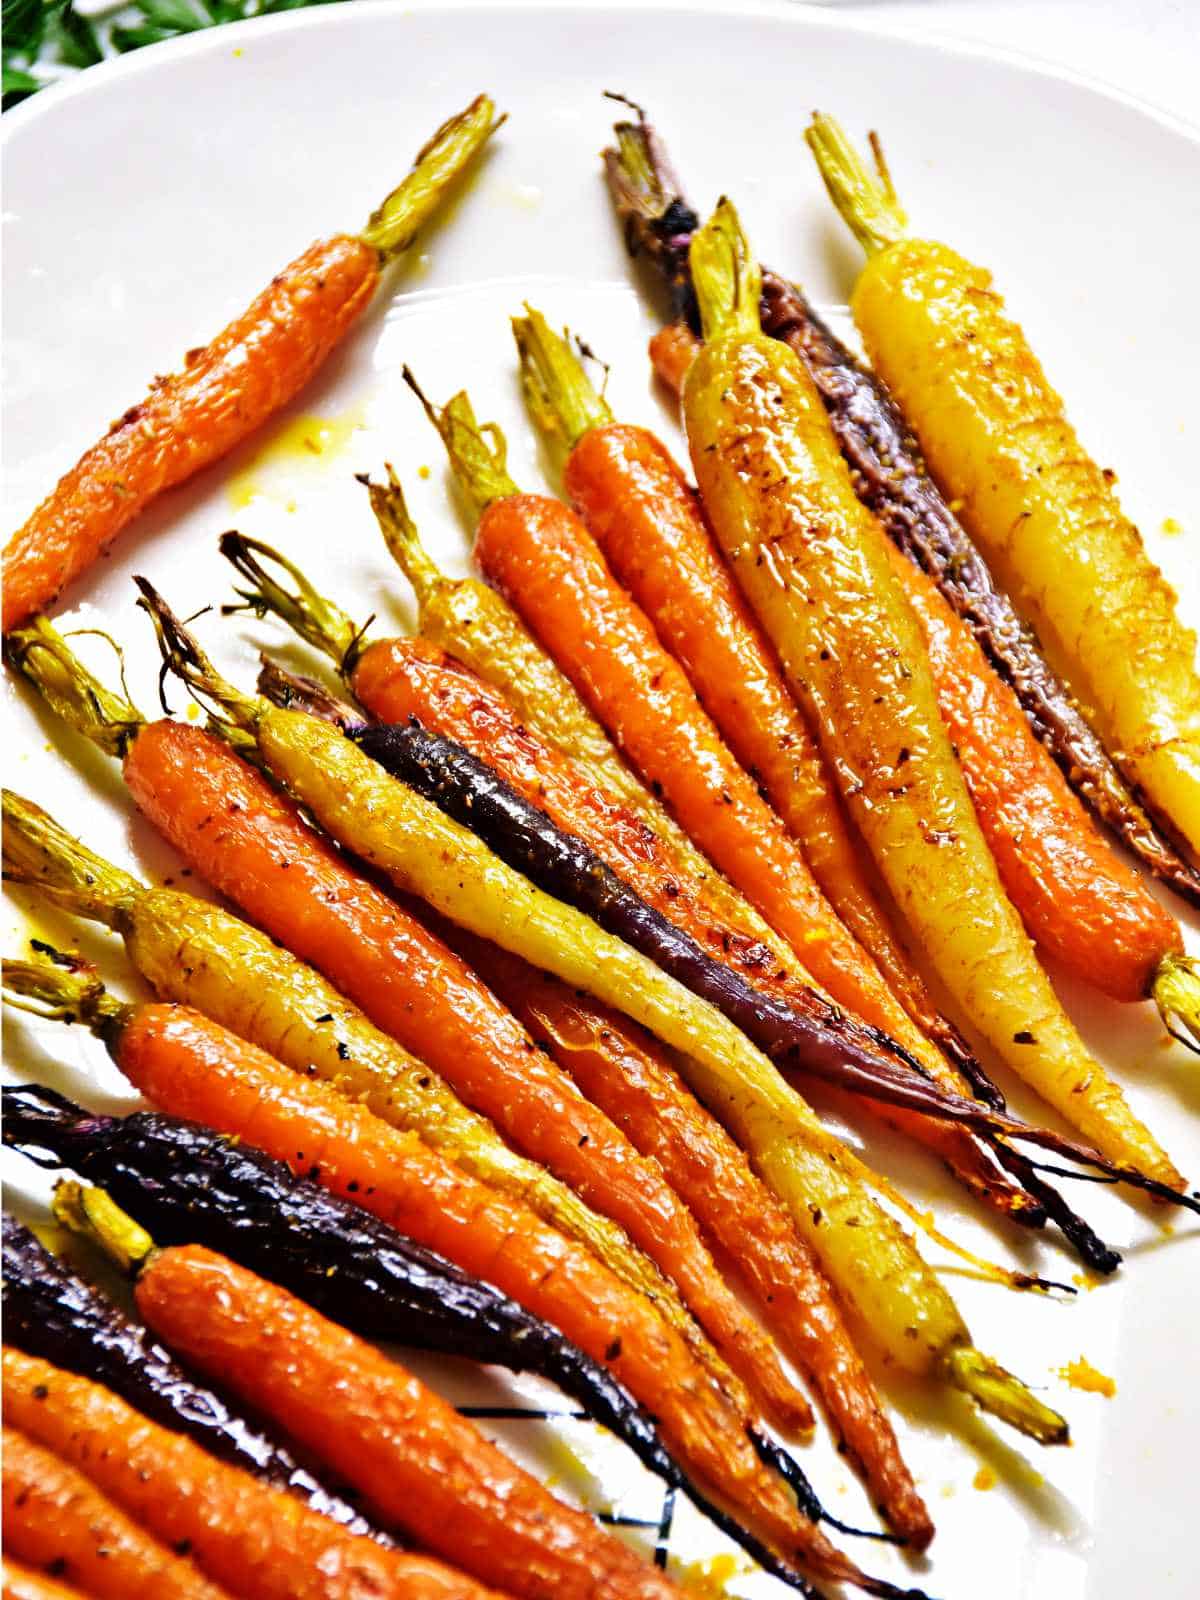 serving platter of roasted heirloom carrots garnished with herbs and olive oil